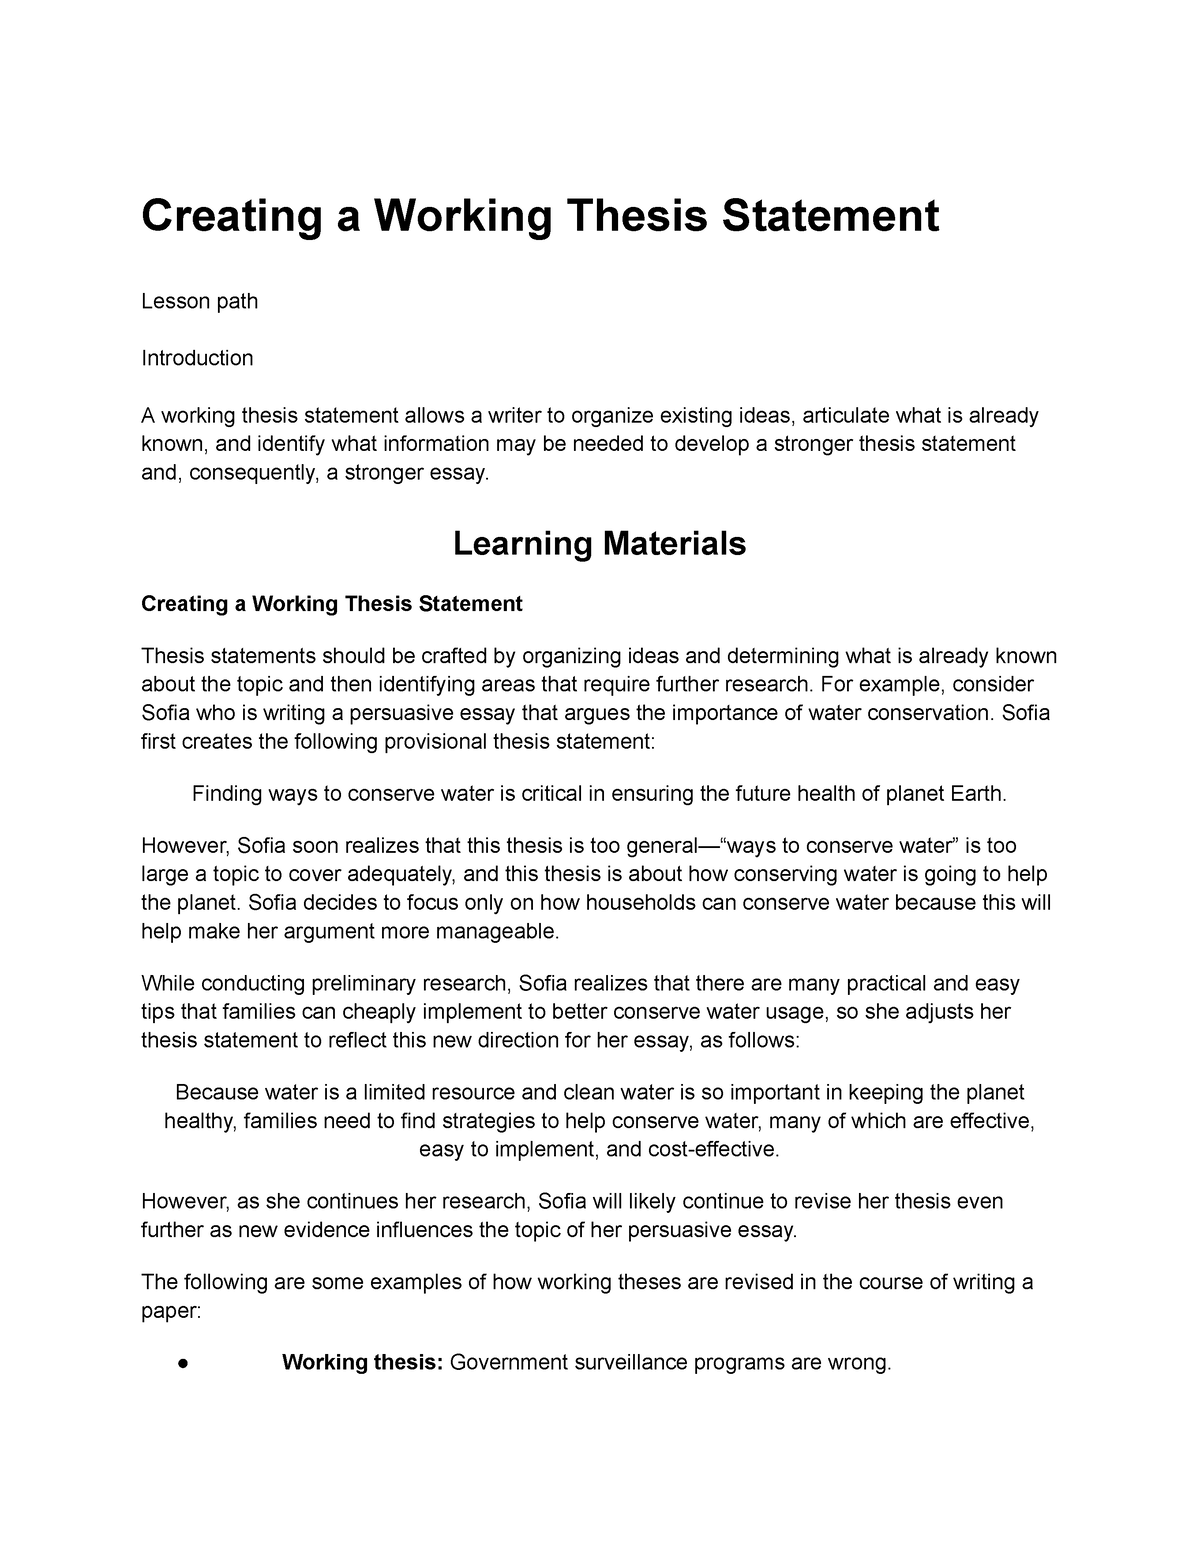 a working thesis is a statement that